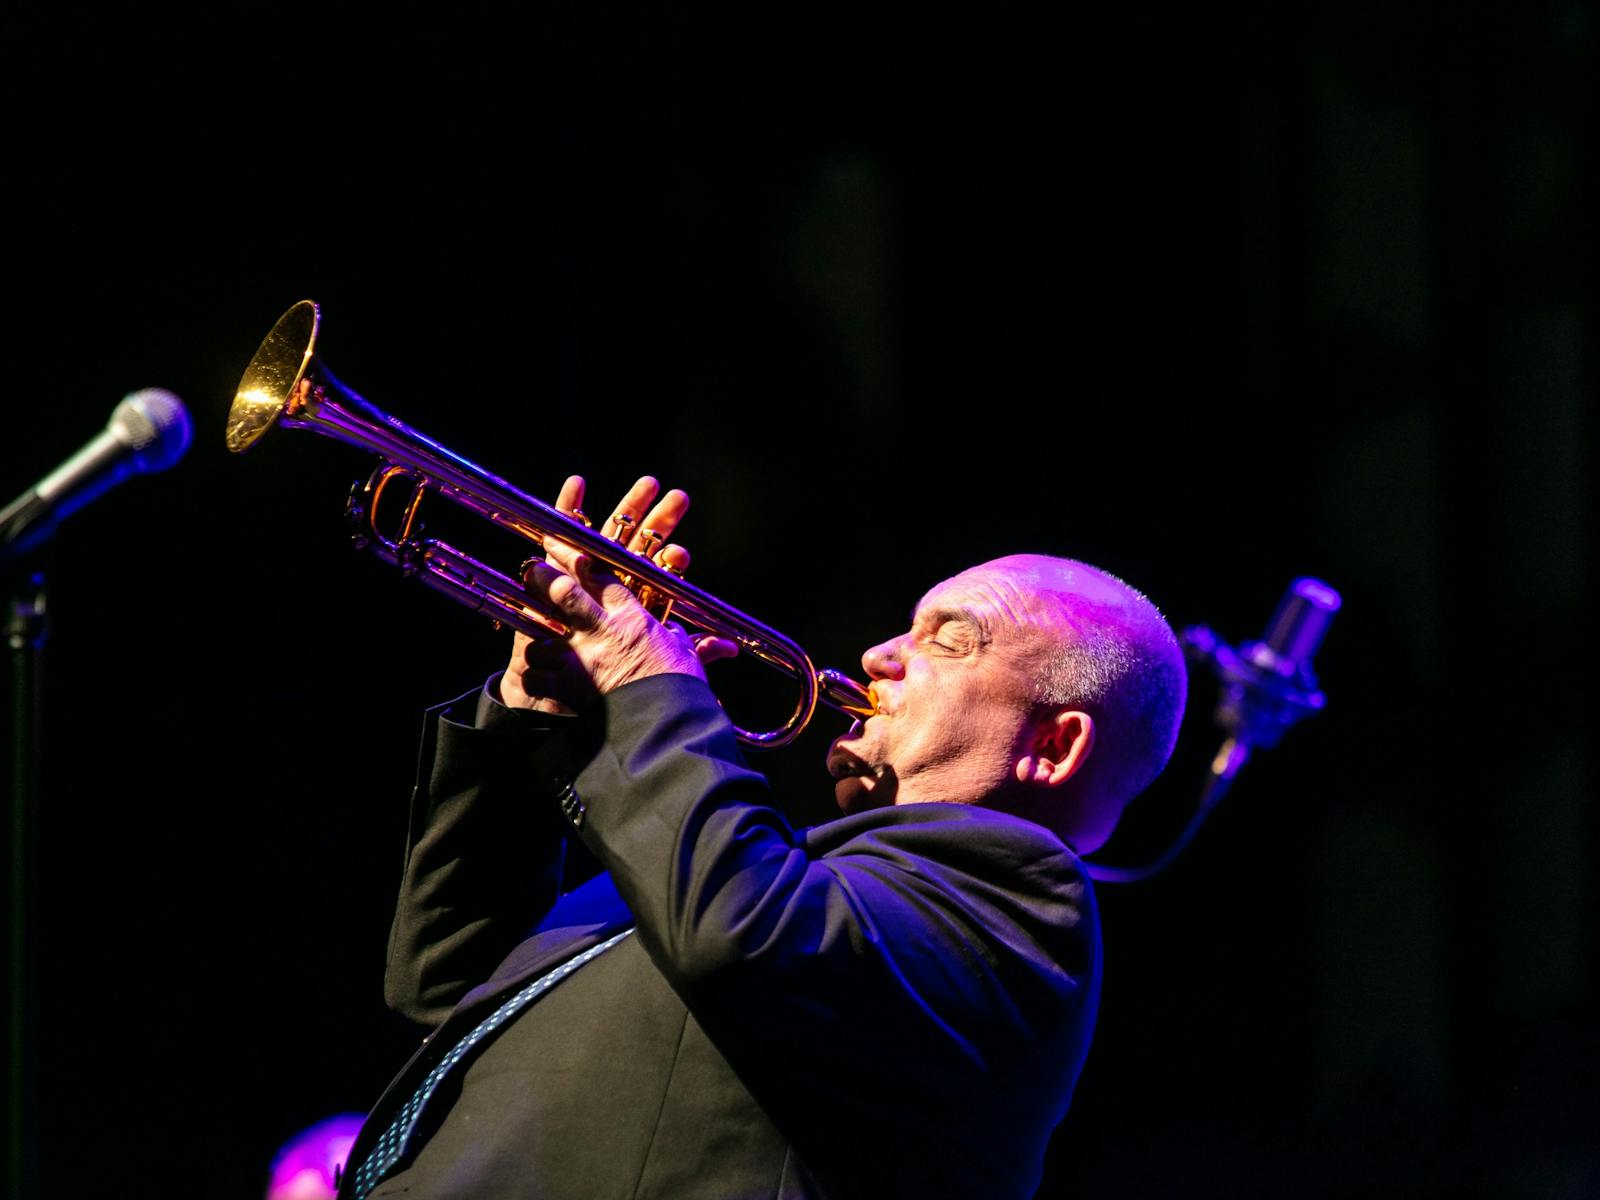 James Morrison plays the trumpet at the Town Hall Thearte during the Devonport Jazz Festival